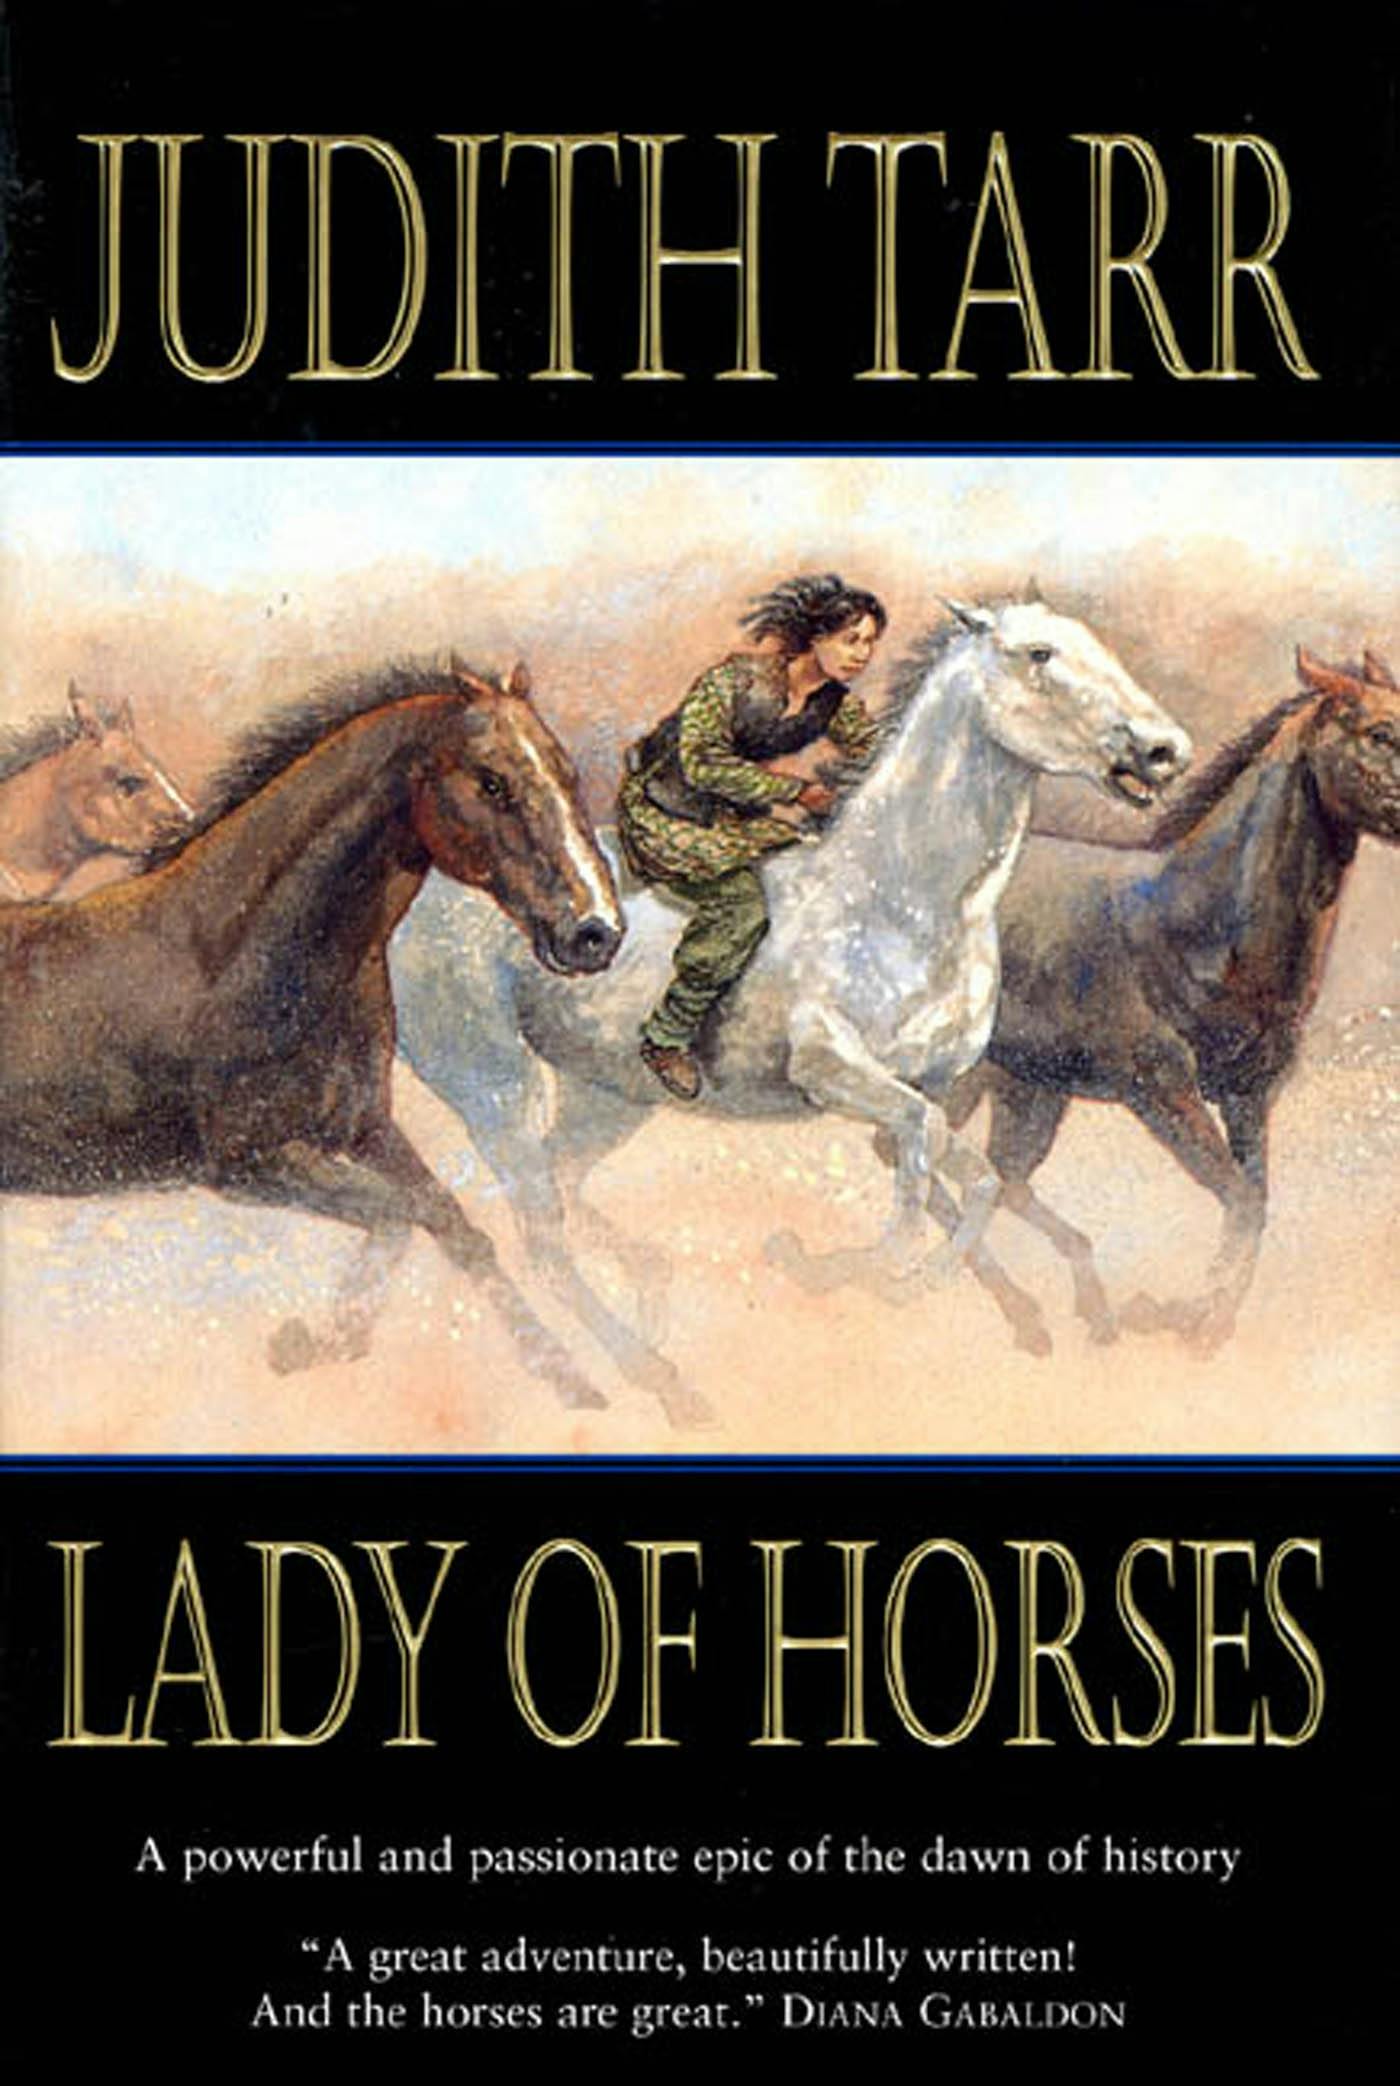 Cover for the book titled as: Lady of Horses